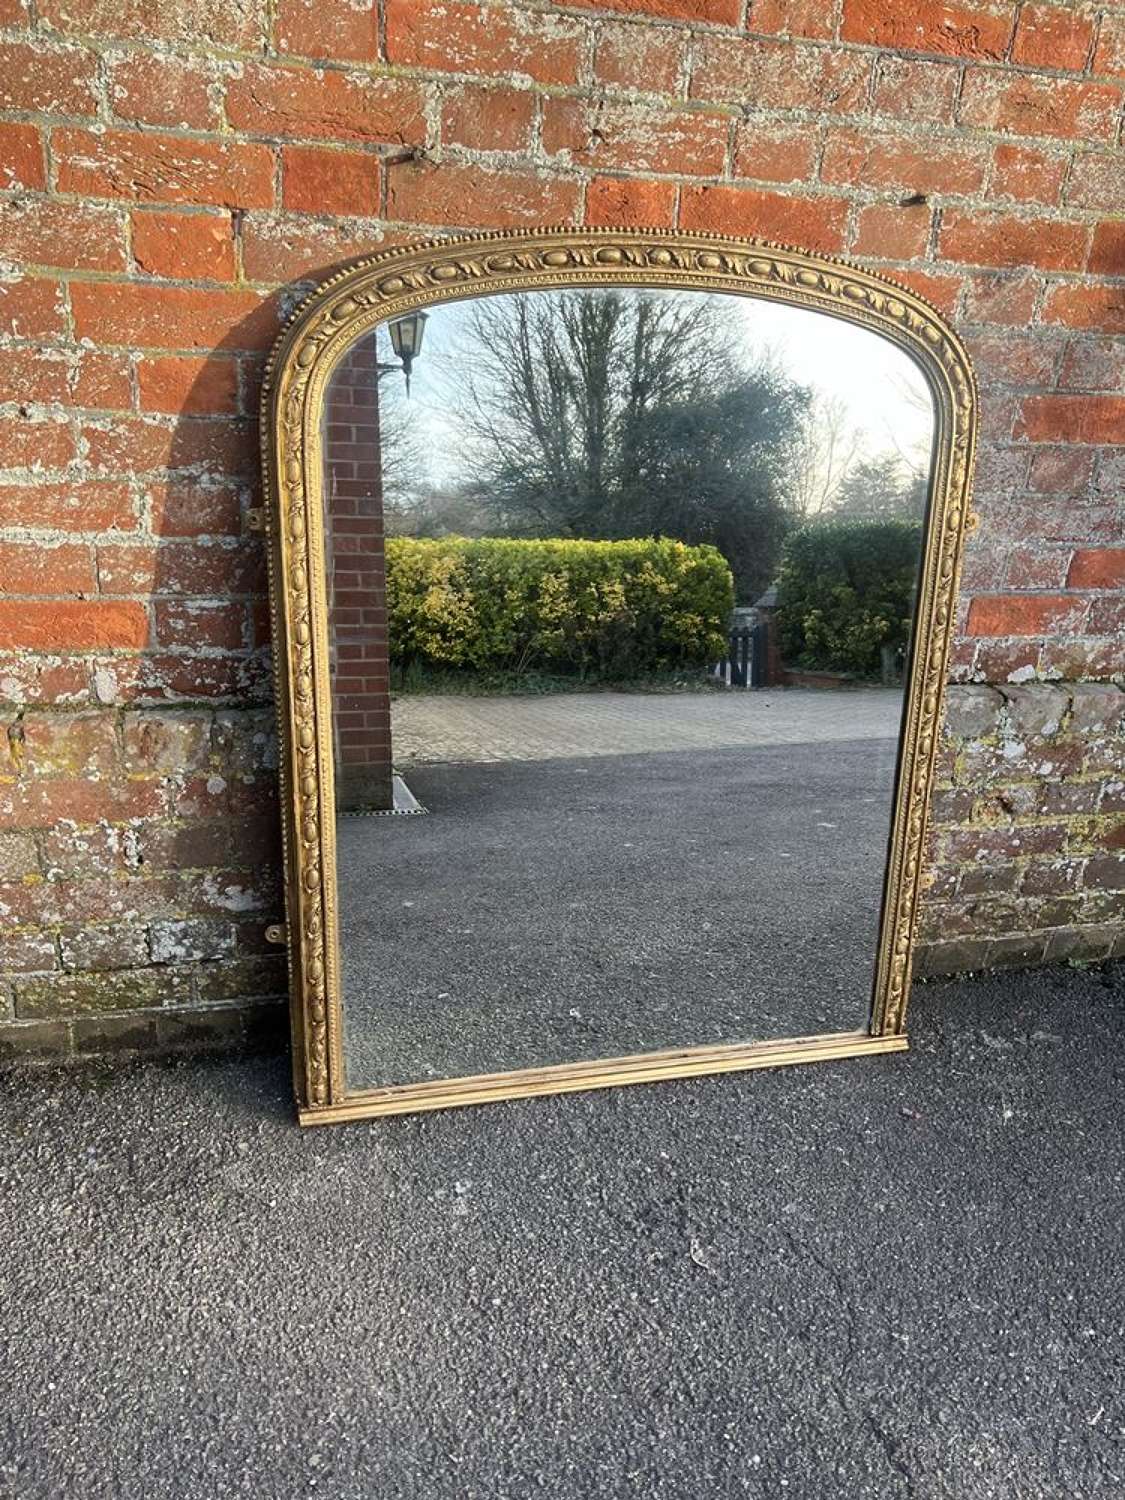 A Superb large Antique English 19thC arched top gilt Overmantle Mirror